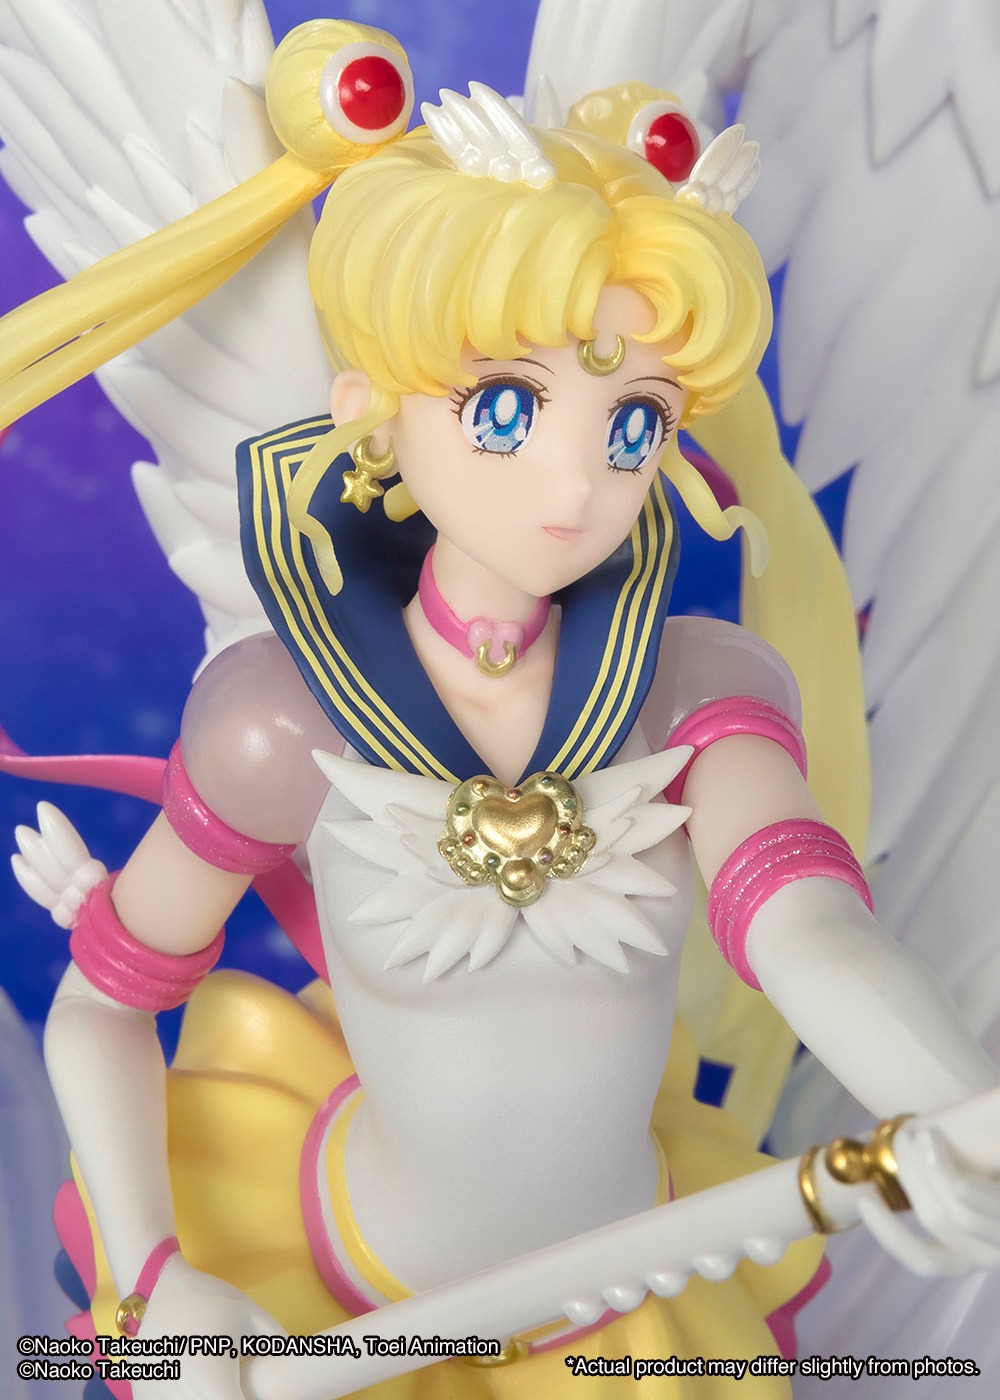 Eternal Sailor Moon (Darkness Calls to Light, and Light, Summons Darkness)  Bandai Spirits - Figuarts Zero Chouette Collectible Figure by Tamashii  Nations